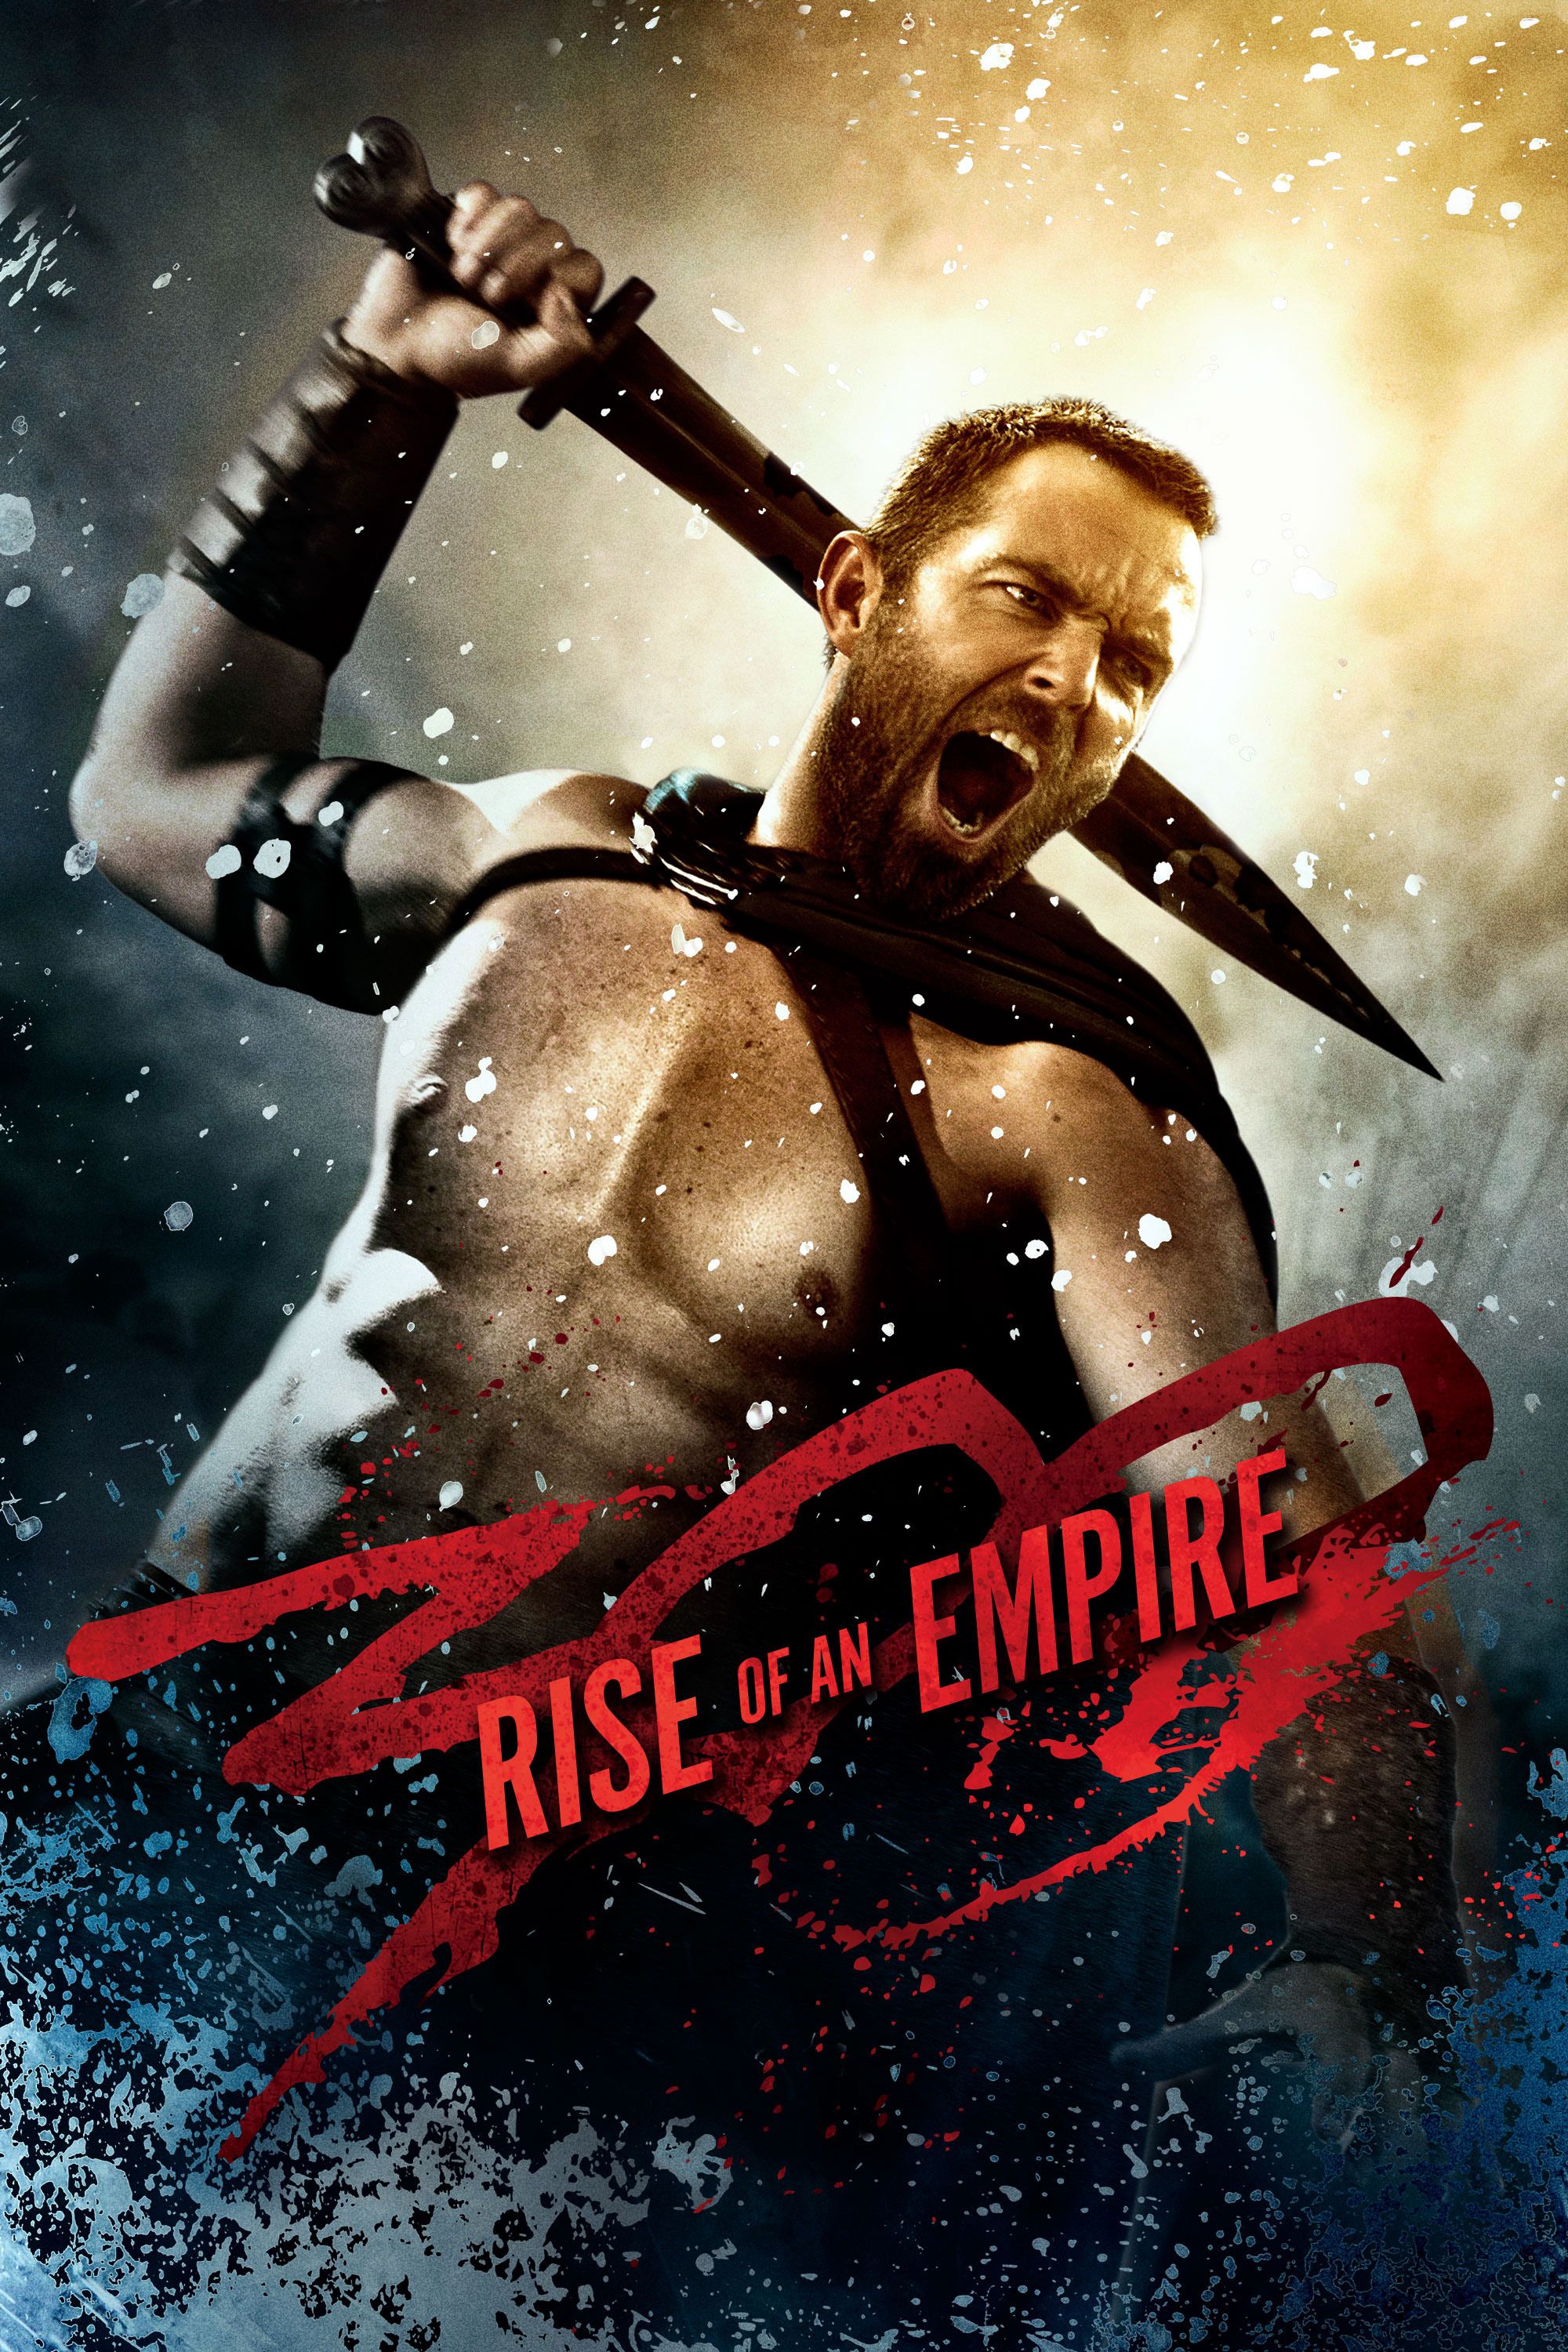 300 rise of an empire movie category